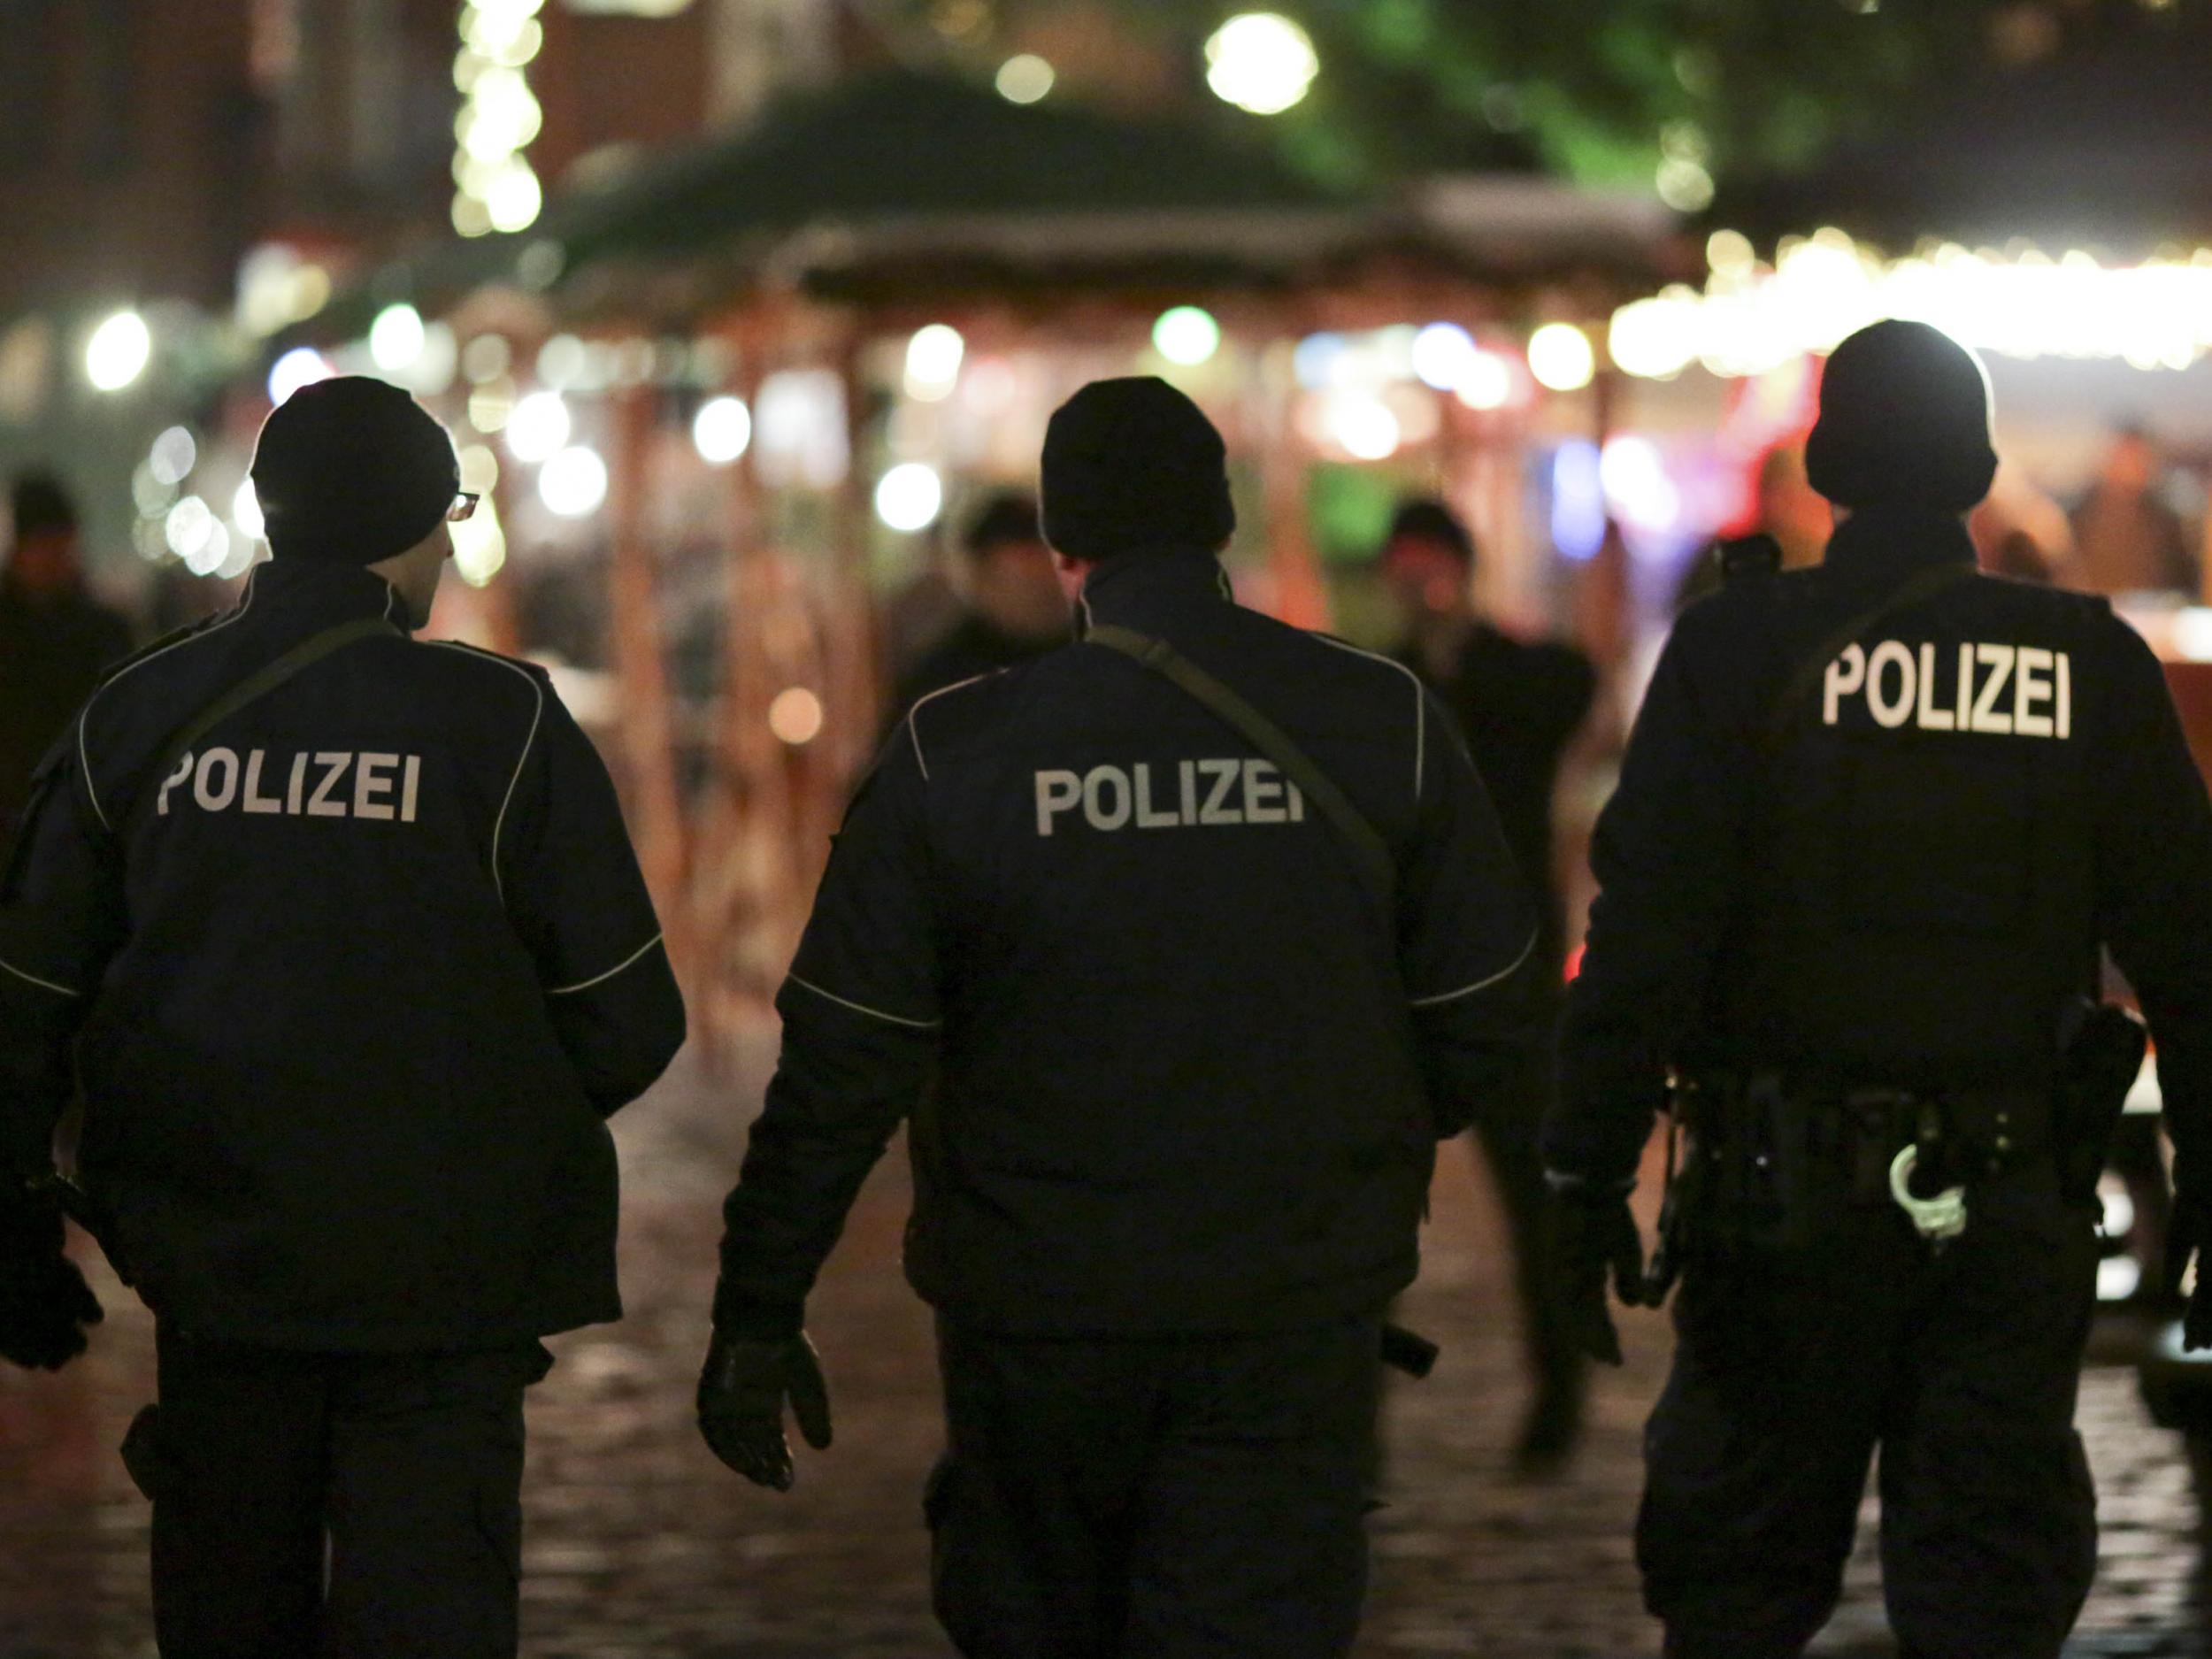 The government vowed to improve counter-terror measures after the Berlin Christmas market attack